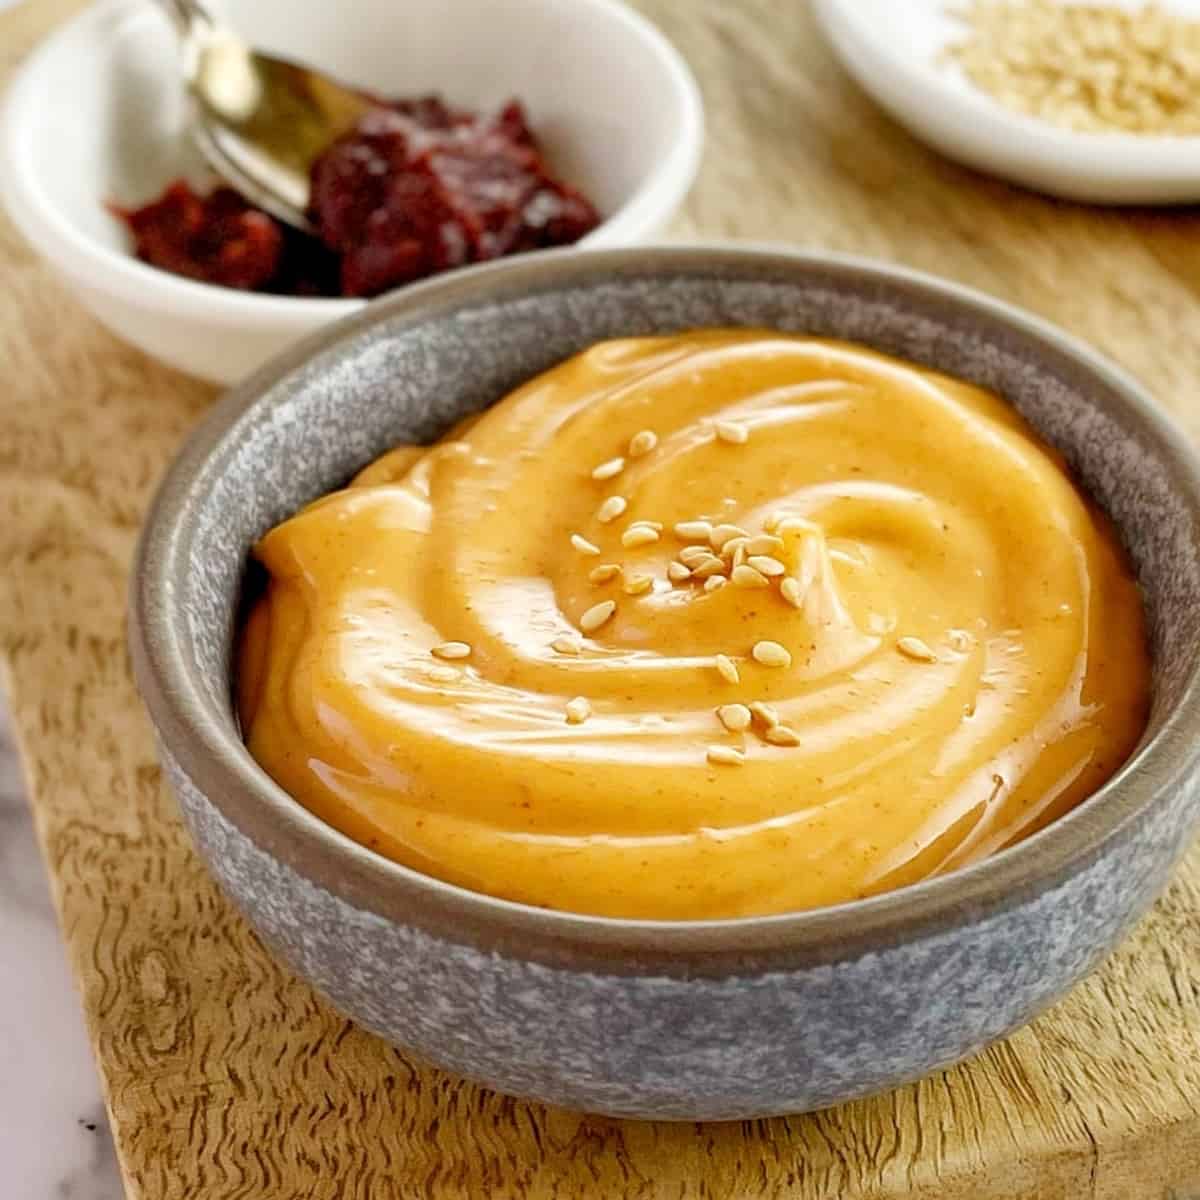 orange coloured mayonnnaise in a grey bowl on a wooden board.